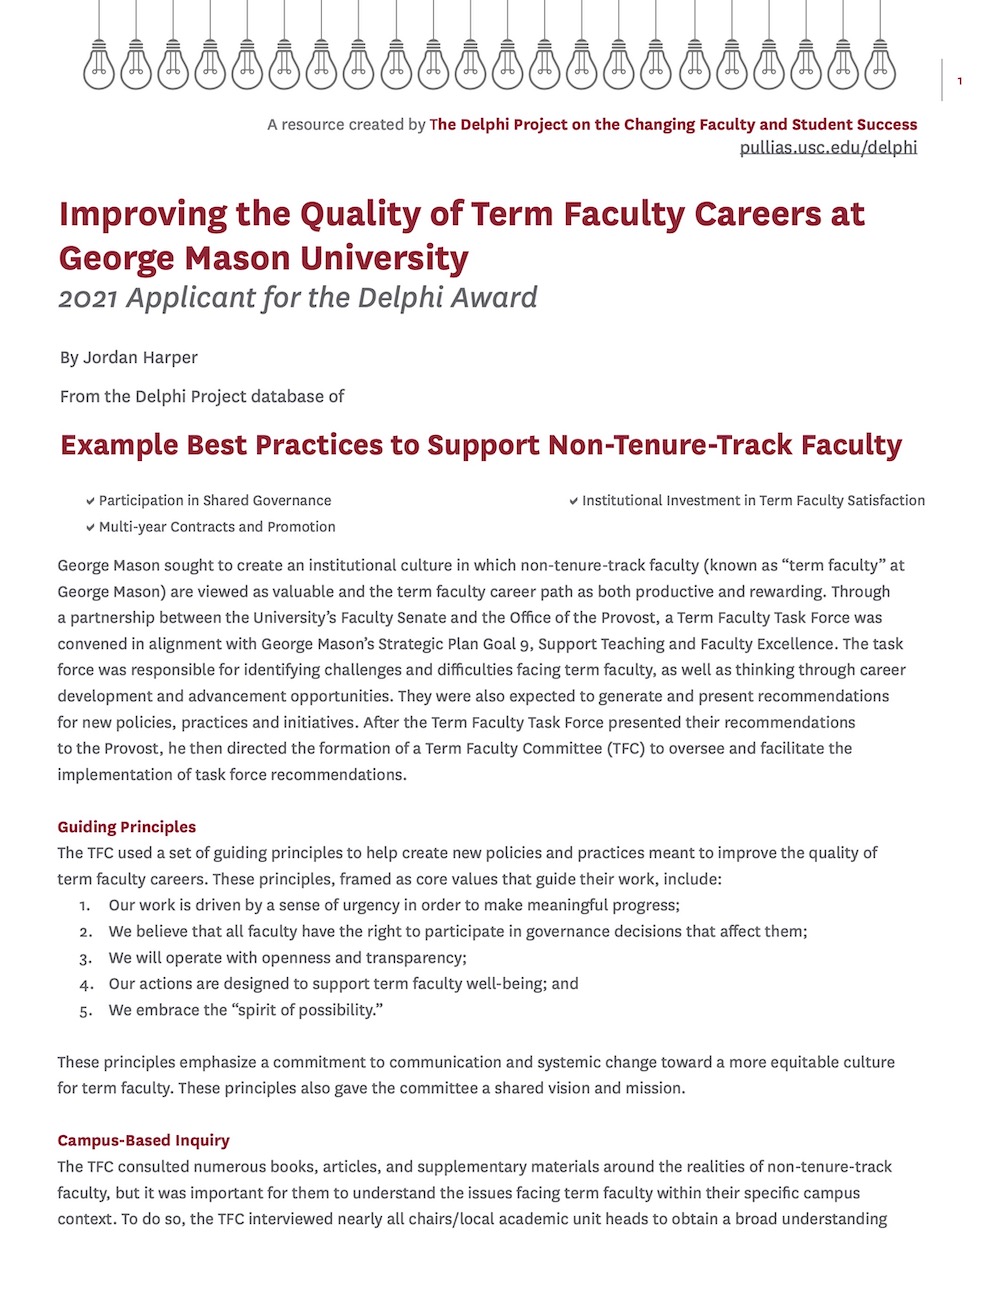 Improving the Quality of Term Faculty Careers at George Mason University